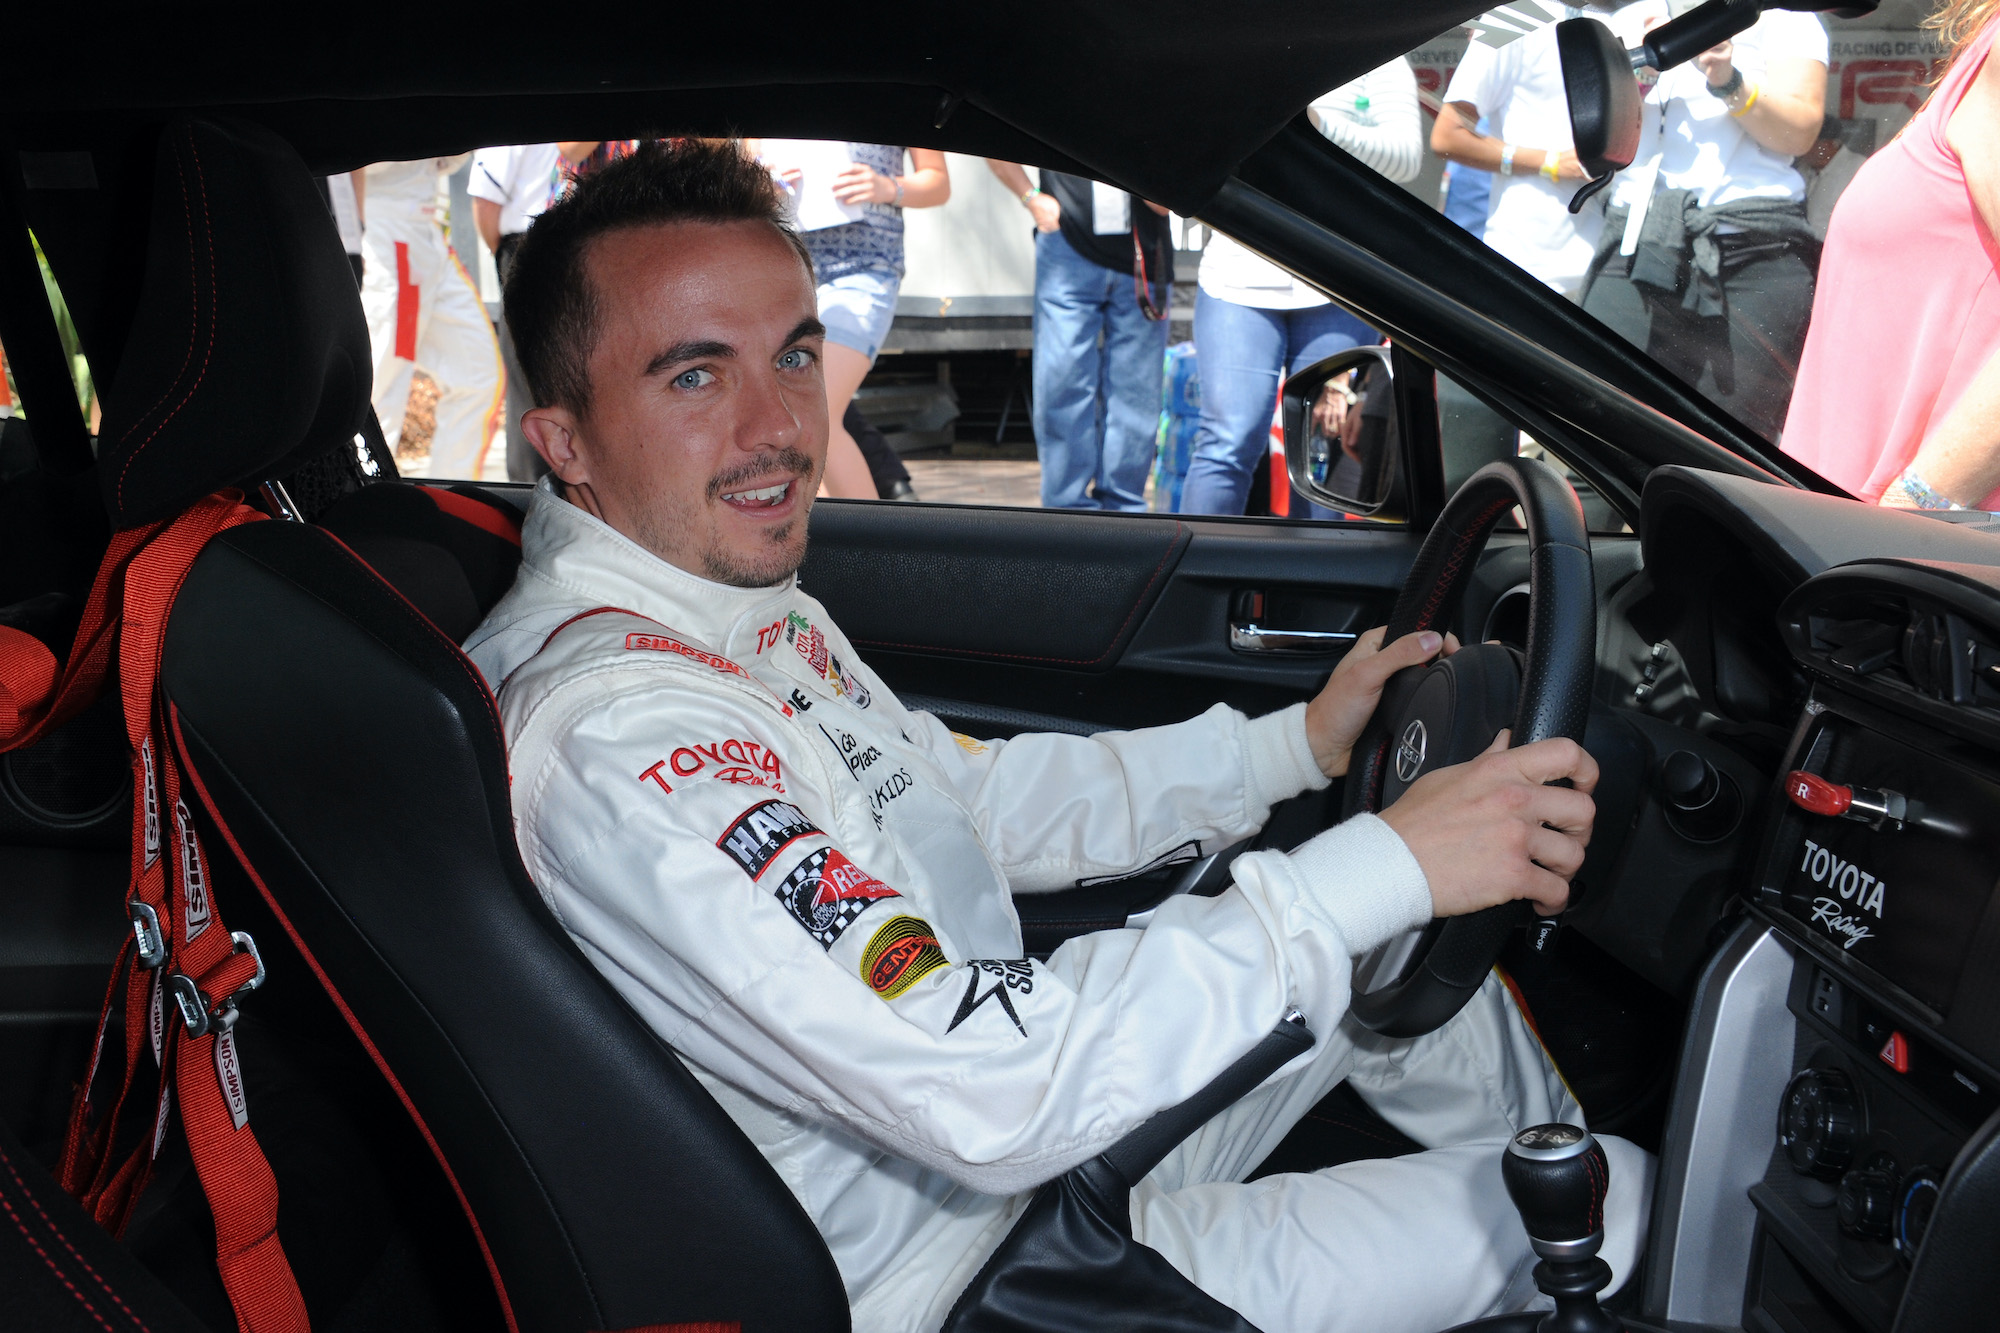 Actor Frankie Muniz Expected to Compete With NASCAR in 2023